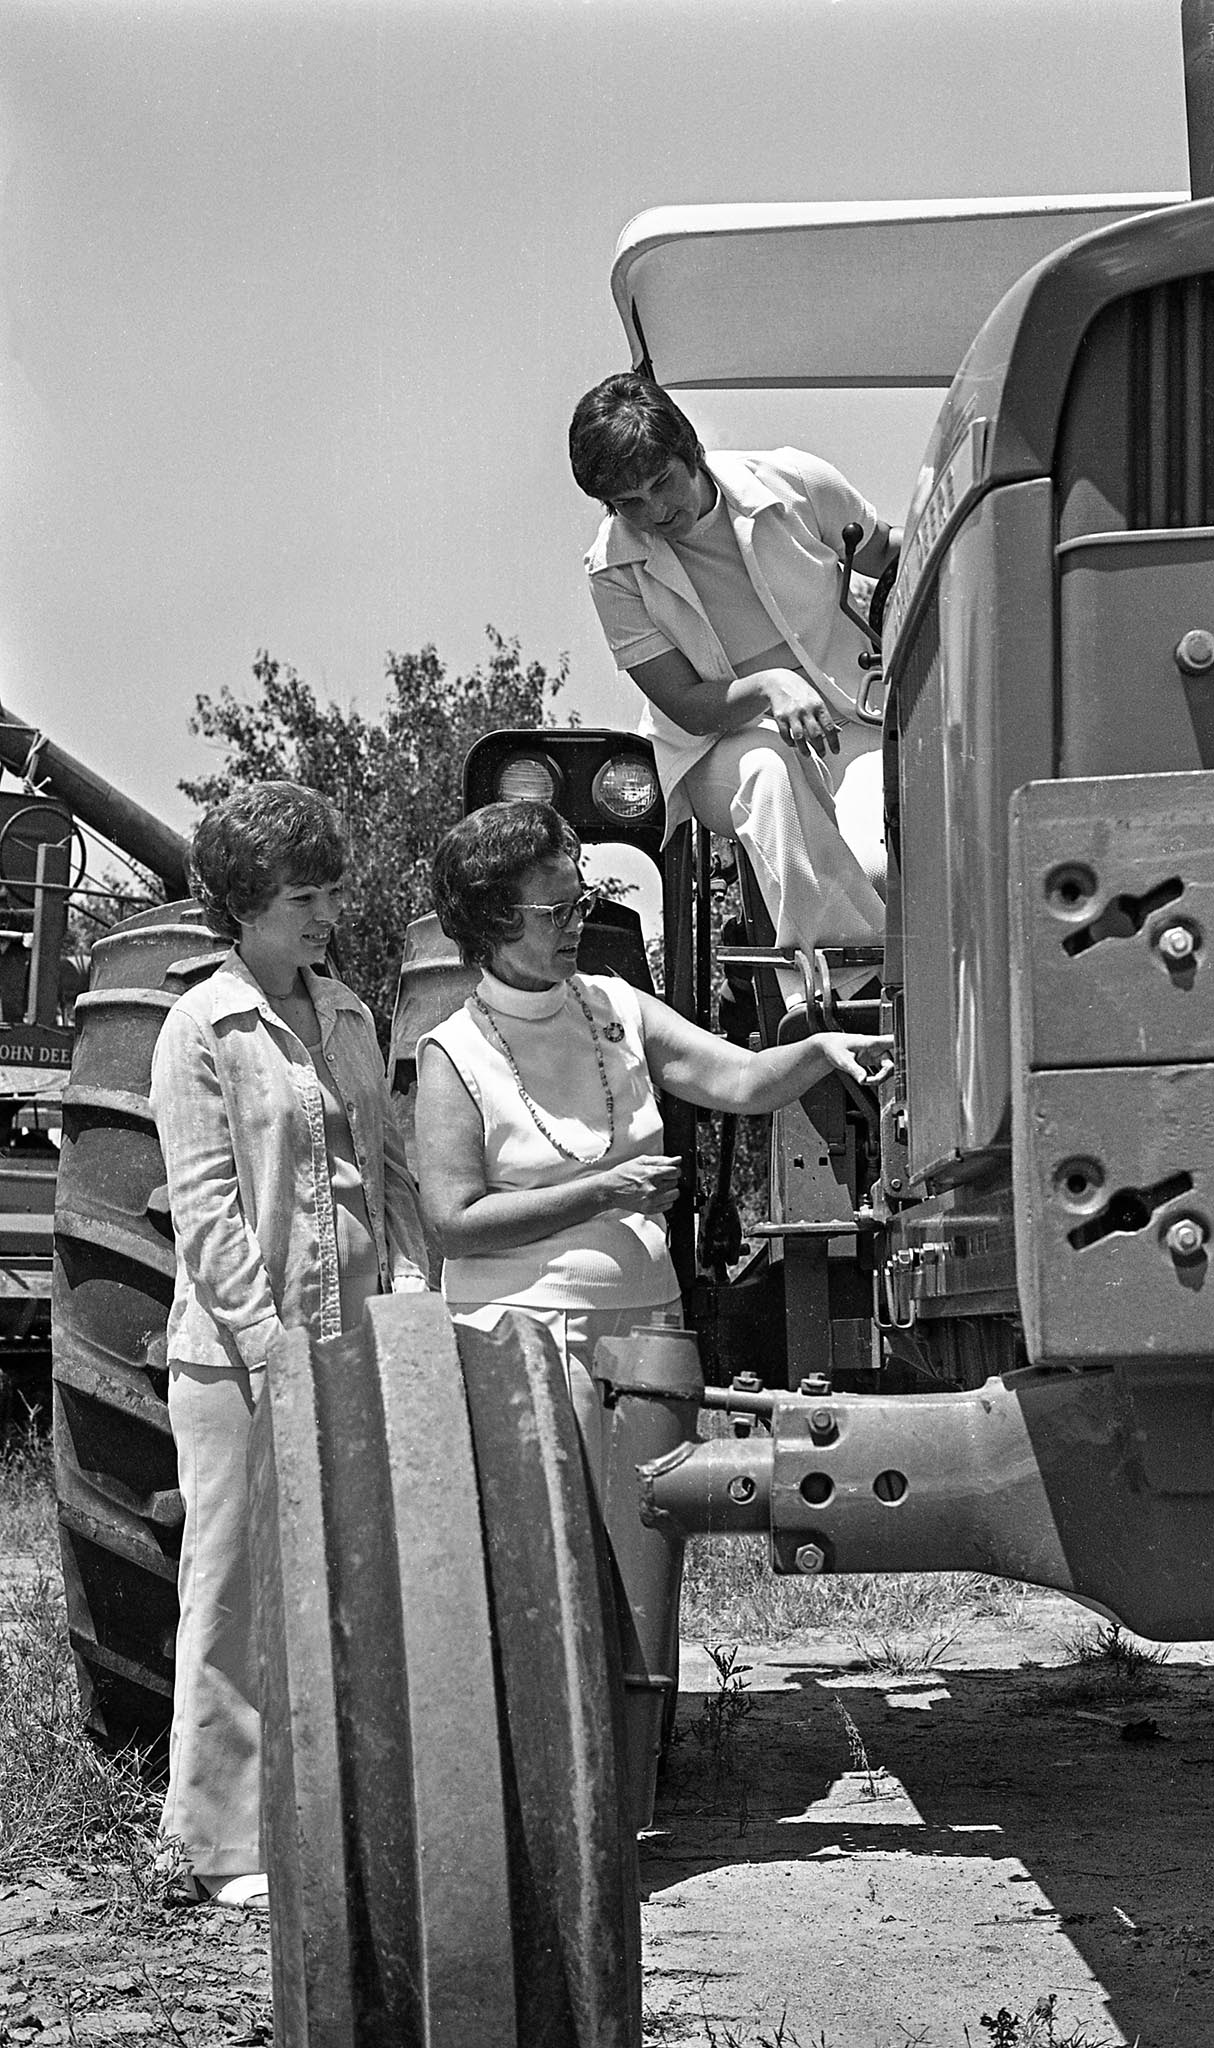 On September 4, 1975, the Noble County’s WLC conducted a Ladies Tractor Driving School at the county fairgrounds. This photo shows Mrs. Ronnie Golliver, Chairman; Mrs. David Sherrard, Vice Chairman; and Mrs. John Main, Secretary, planning subject material for the school.